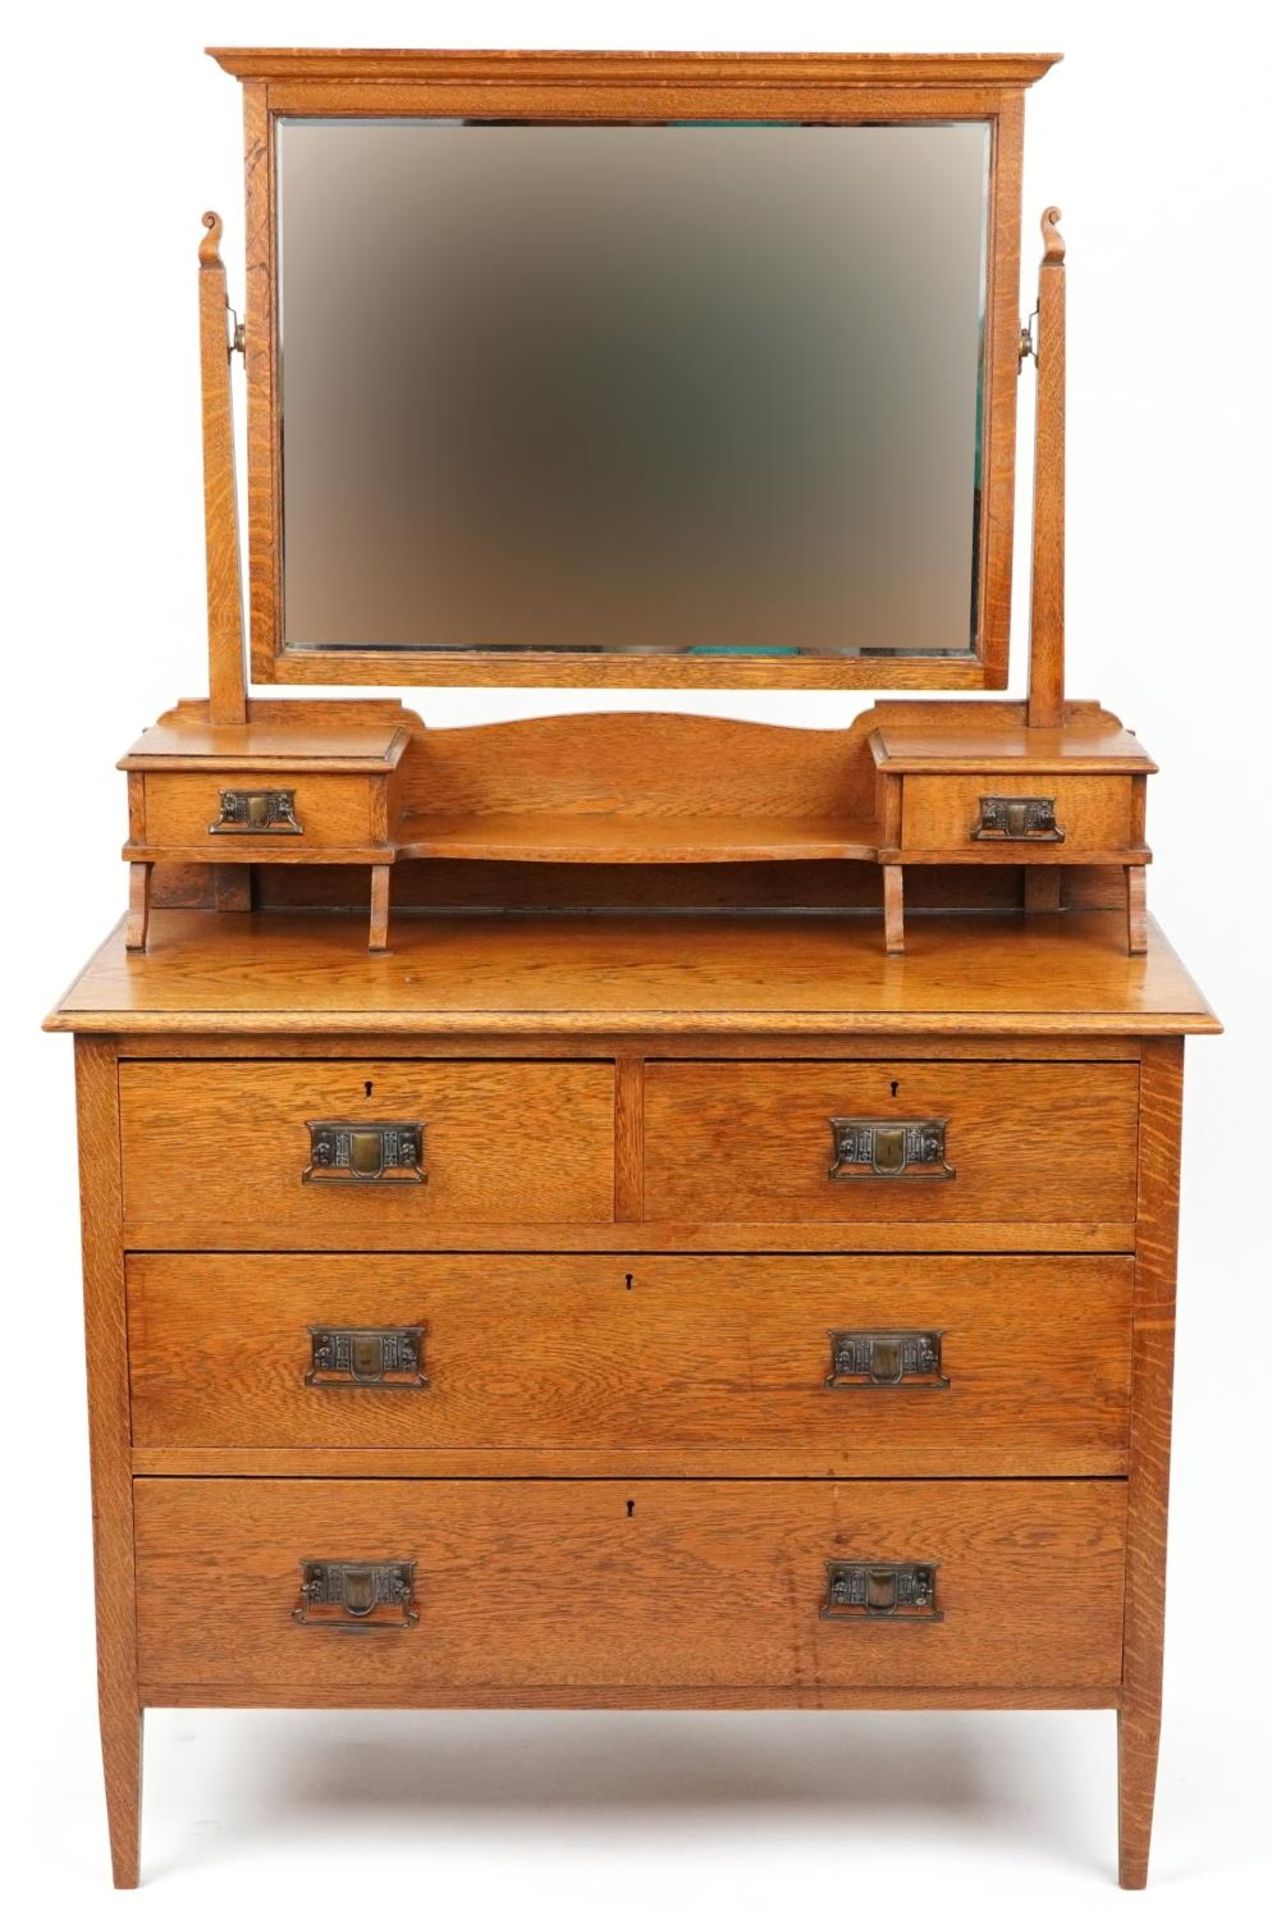 Arts & Crafts oak dressing chest with swing mirror and ornate bronzed handles, 147.5cm H x 91cm W